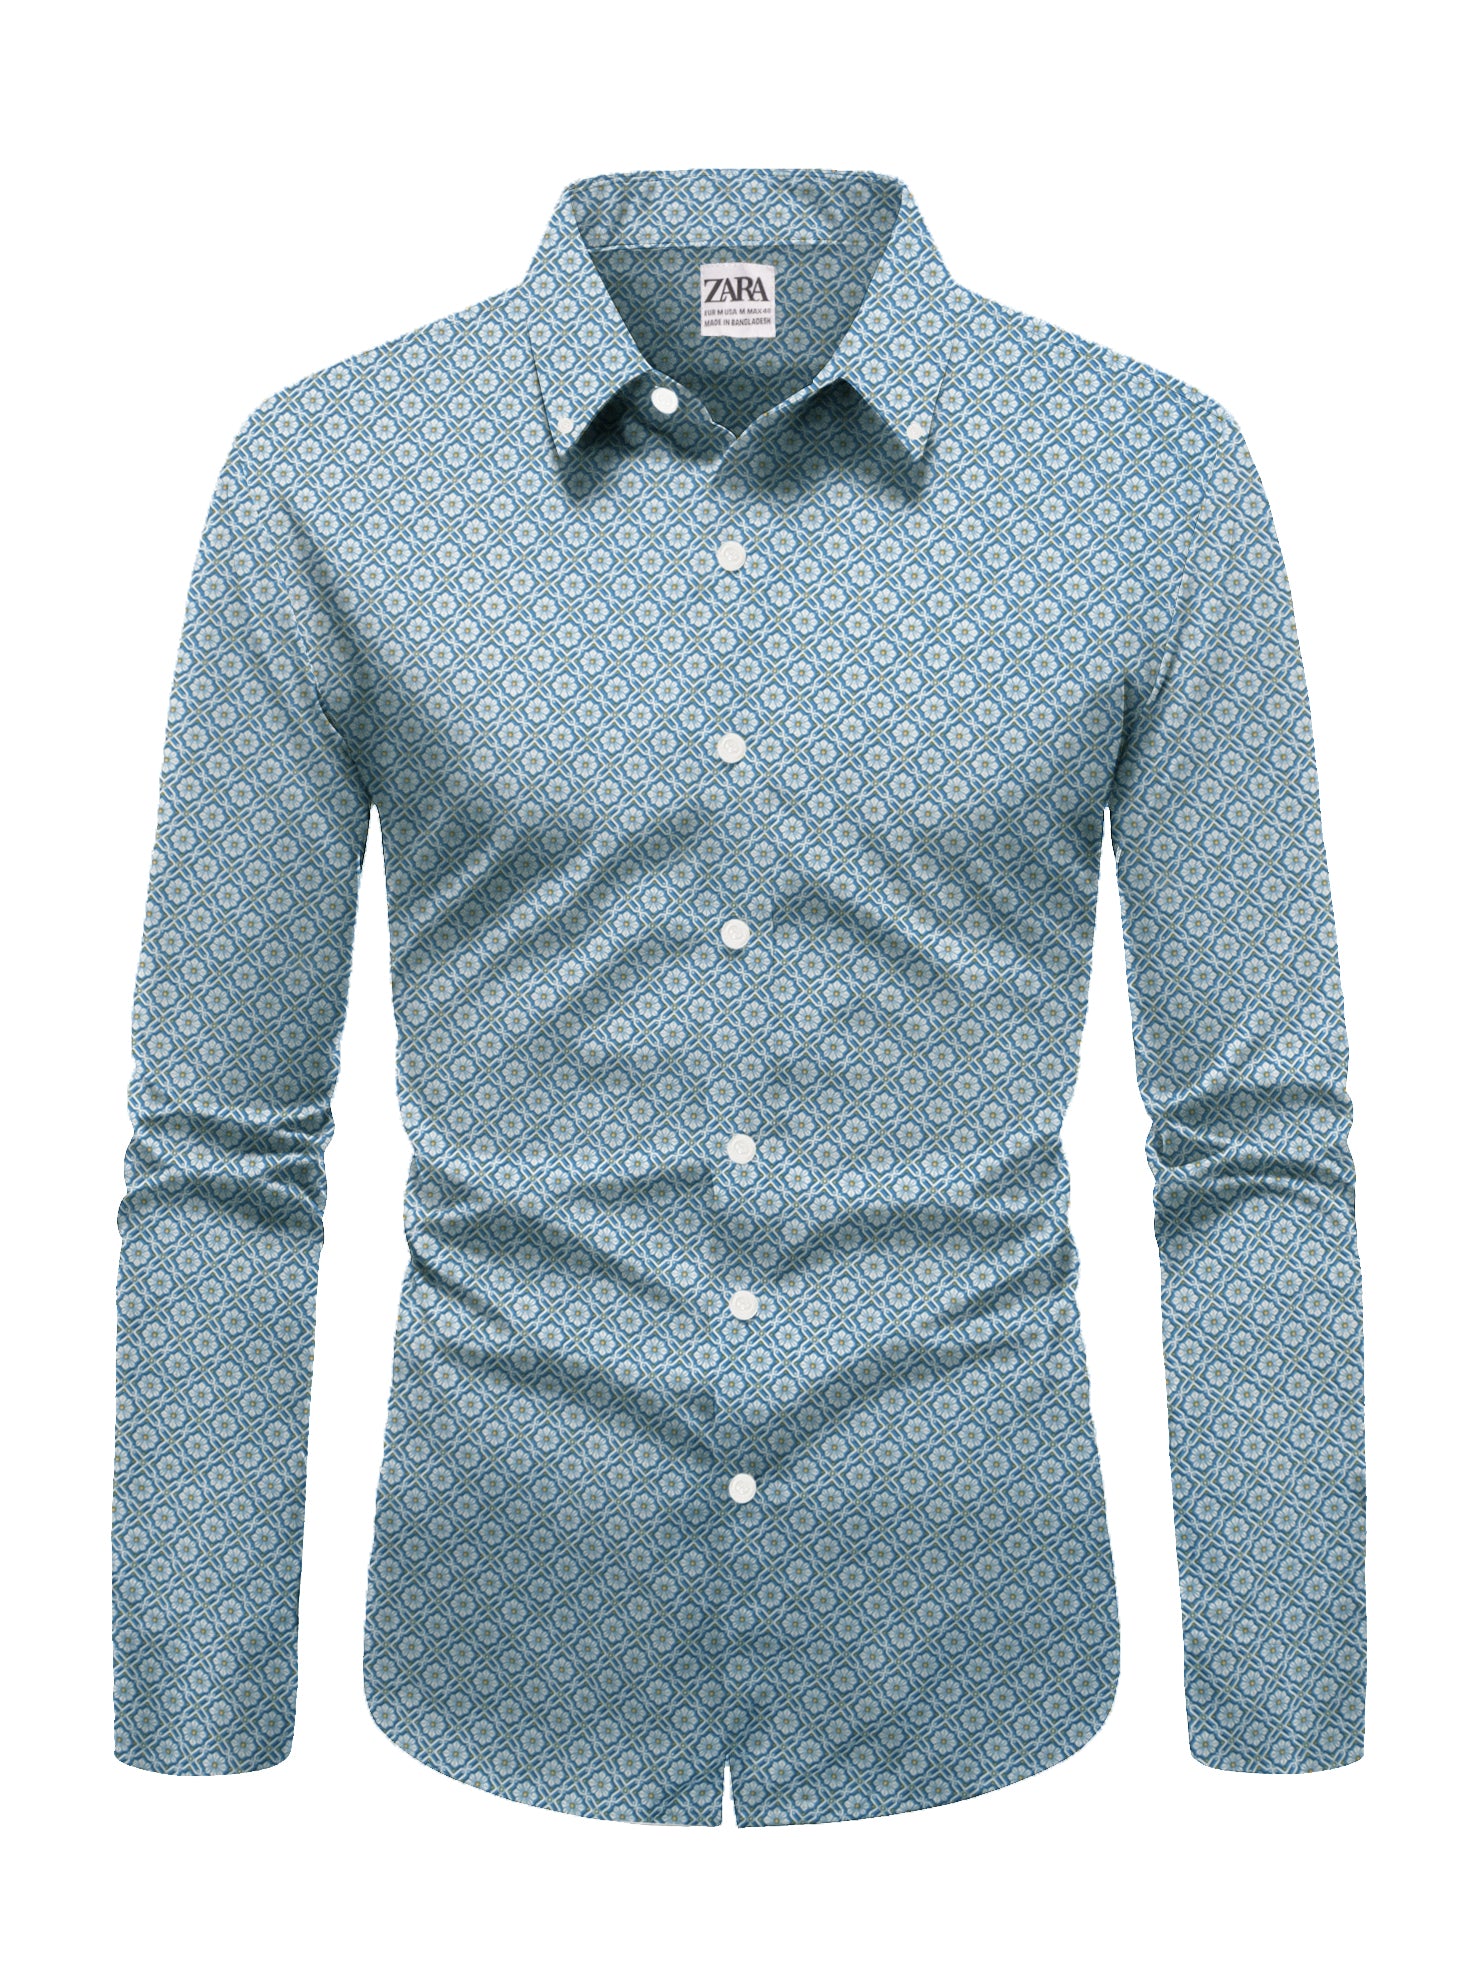 ZM Premium Slim Fit Casual Shirt For Men-Blue with Allover Print-SP2487